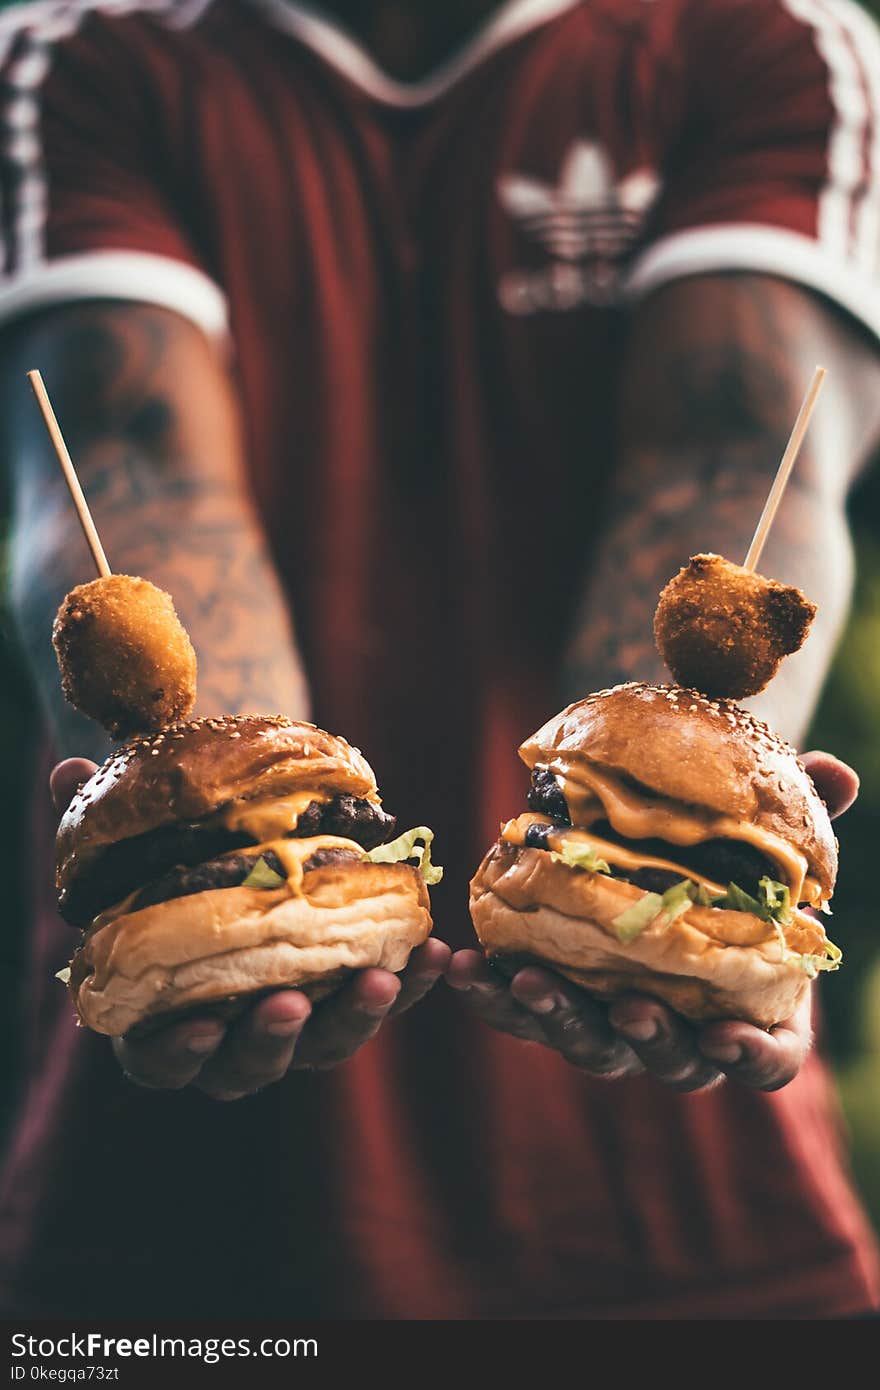 Person Holding Two Hamburgers